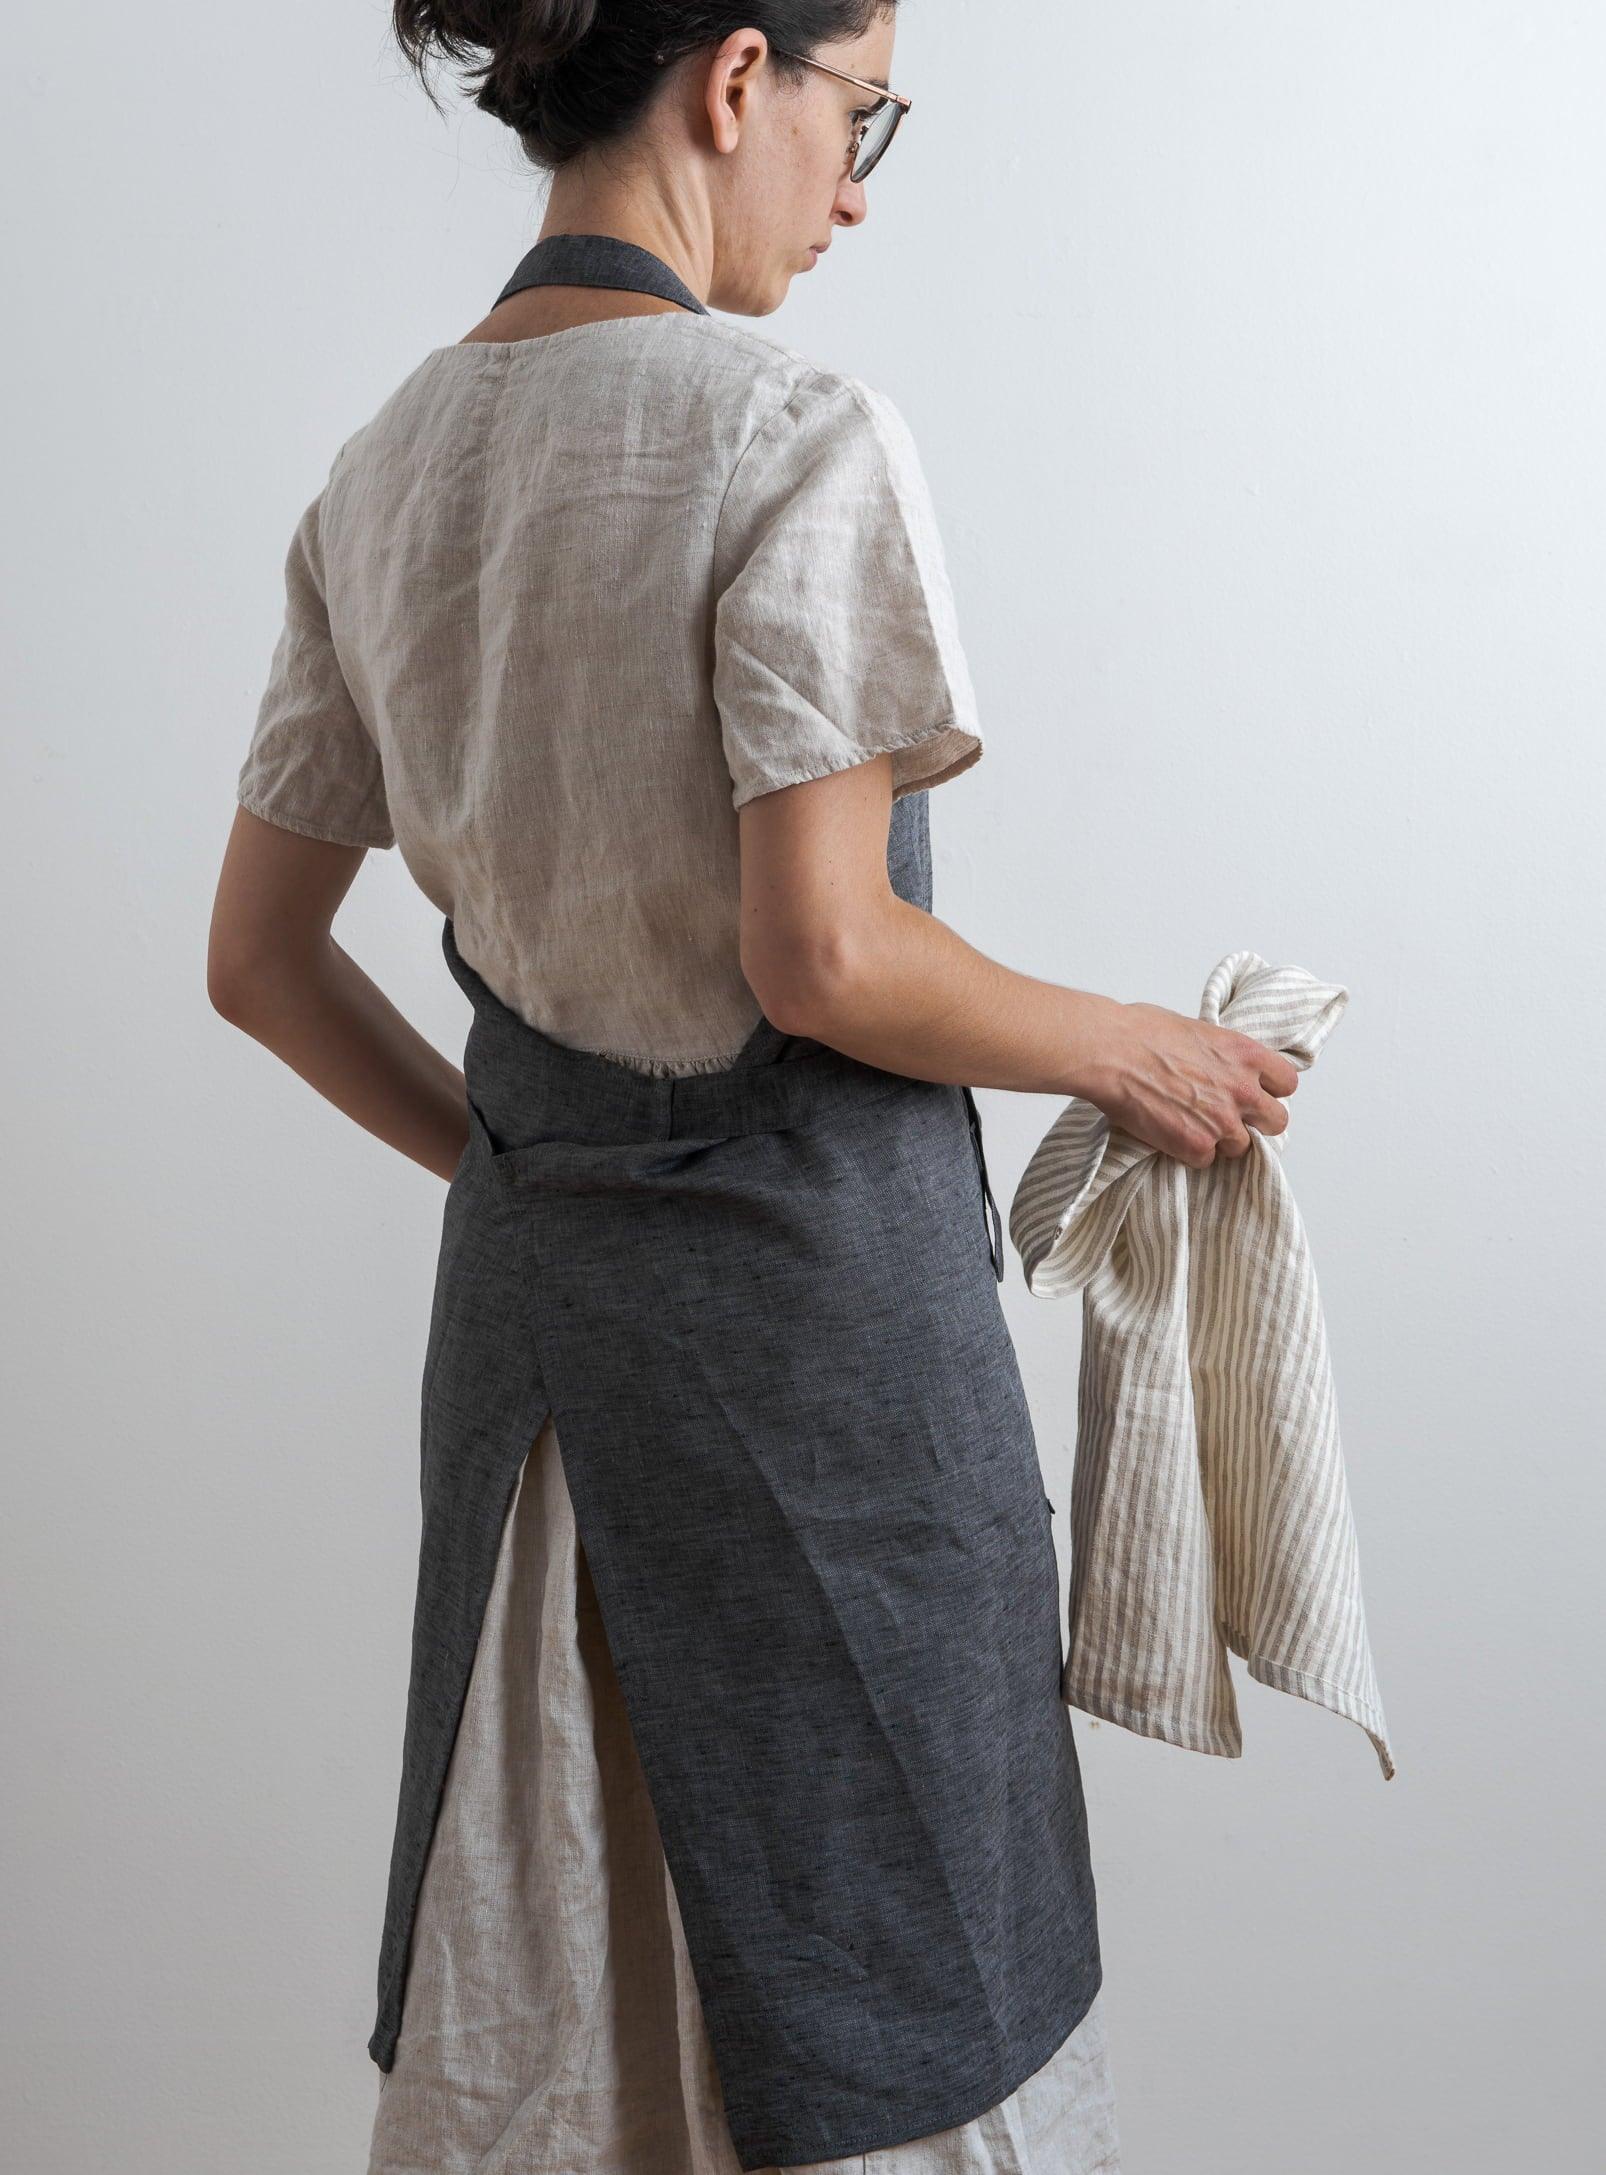 woman seen from behind wearing a grey kitchen apron and holding a tea towel